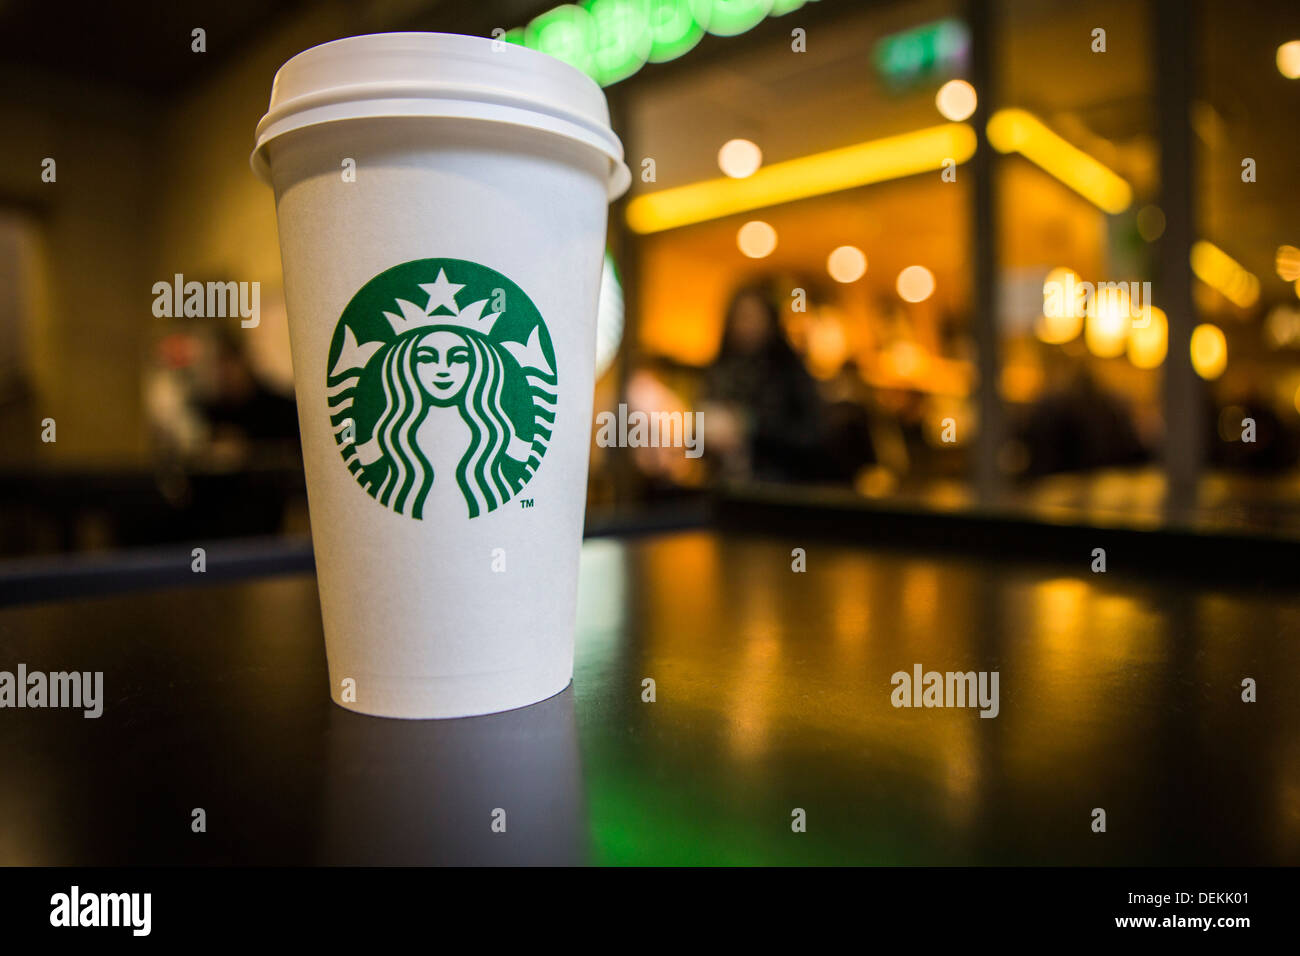 A Starbucks coffee cup sitting on a table outside Starbucks coffee shop, Canary Wharf. London, UK. Stock Photo